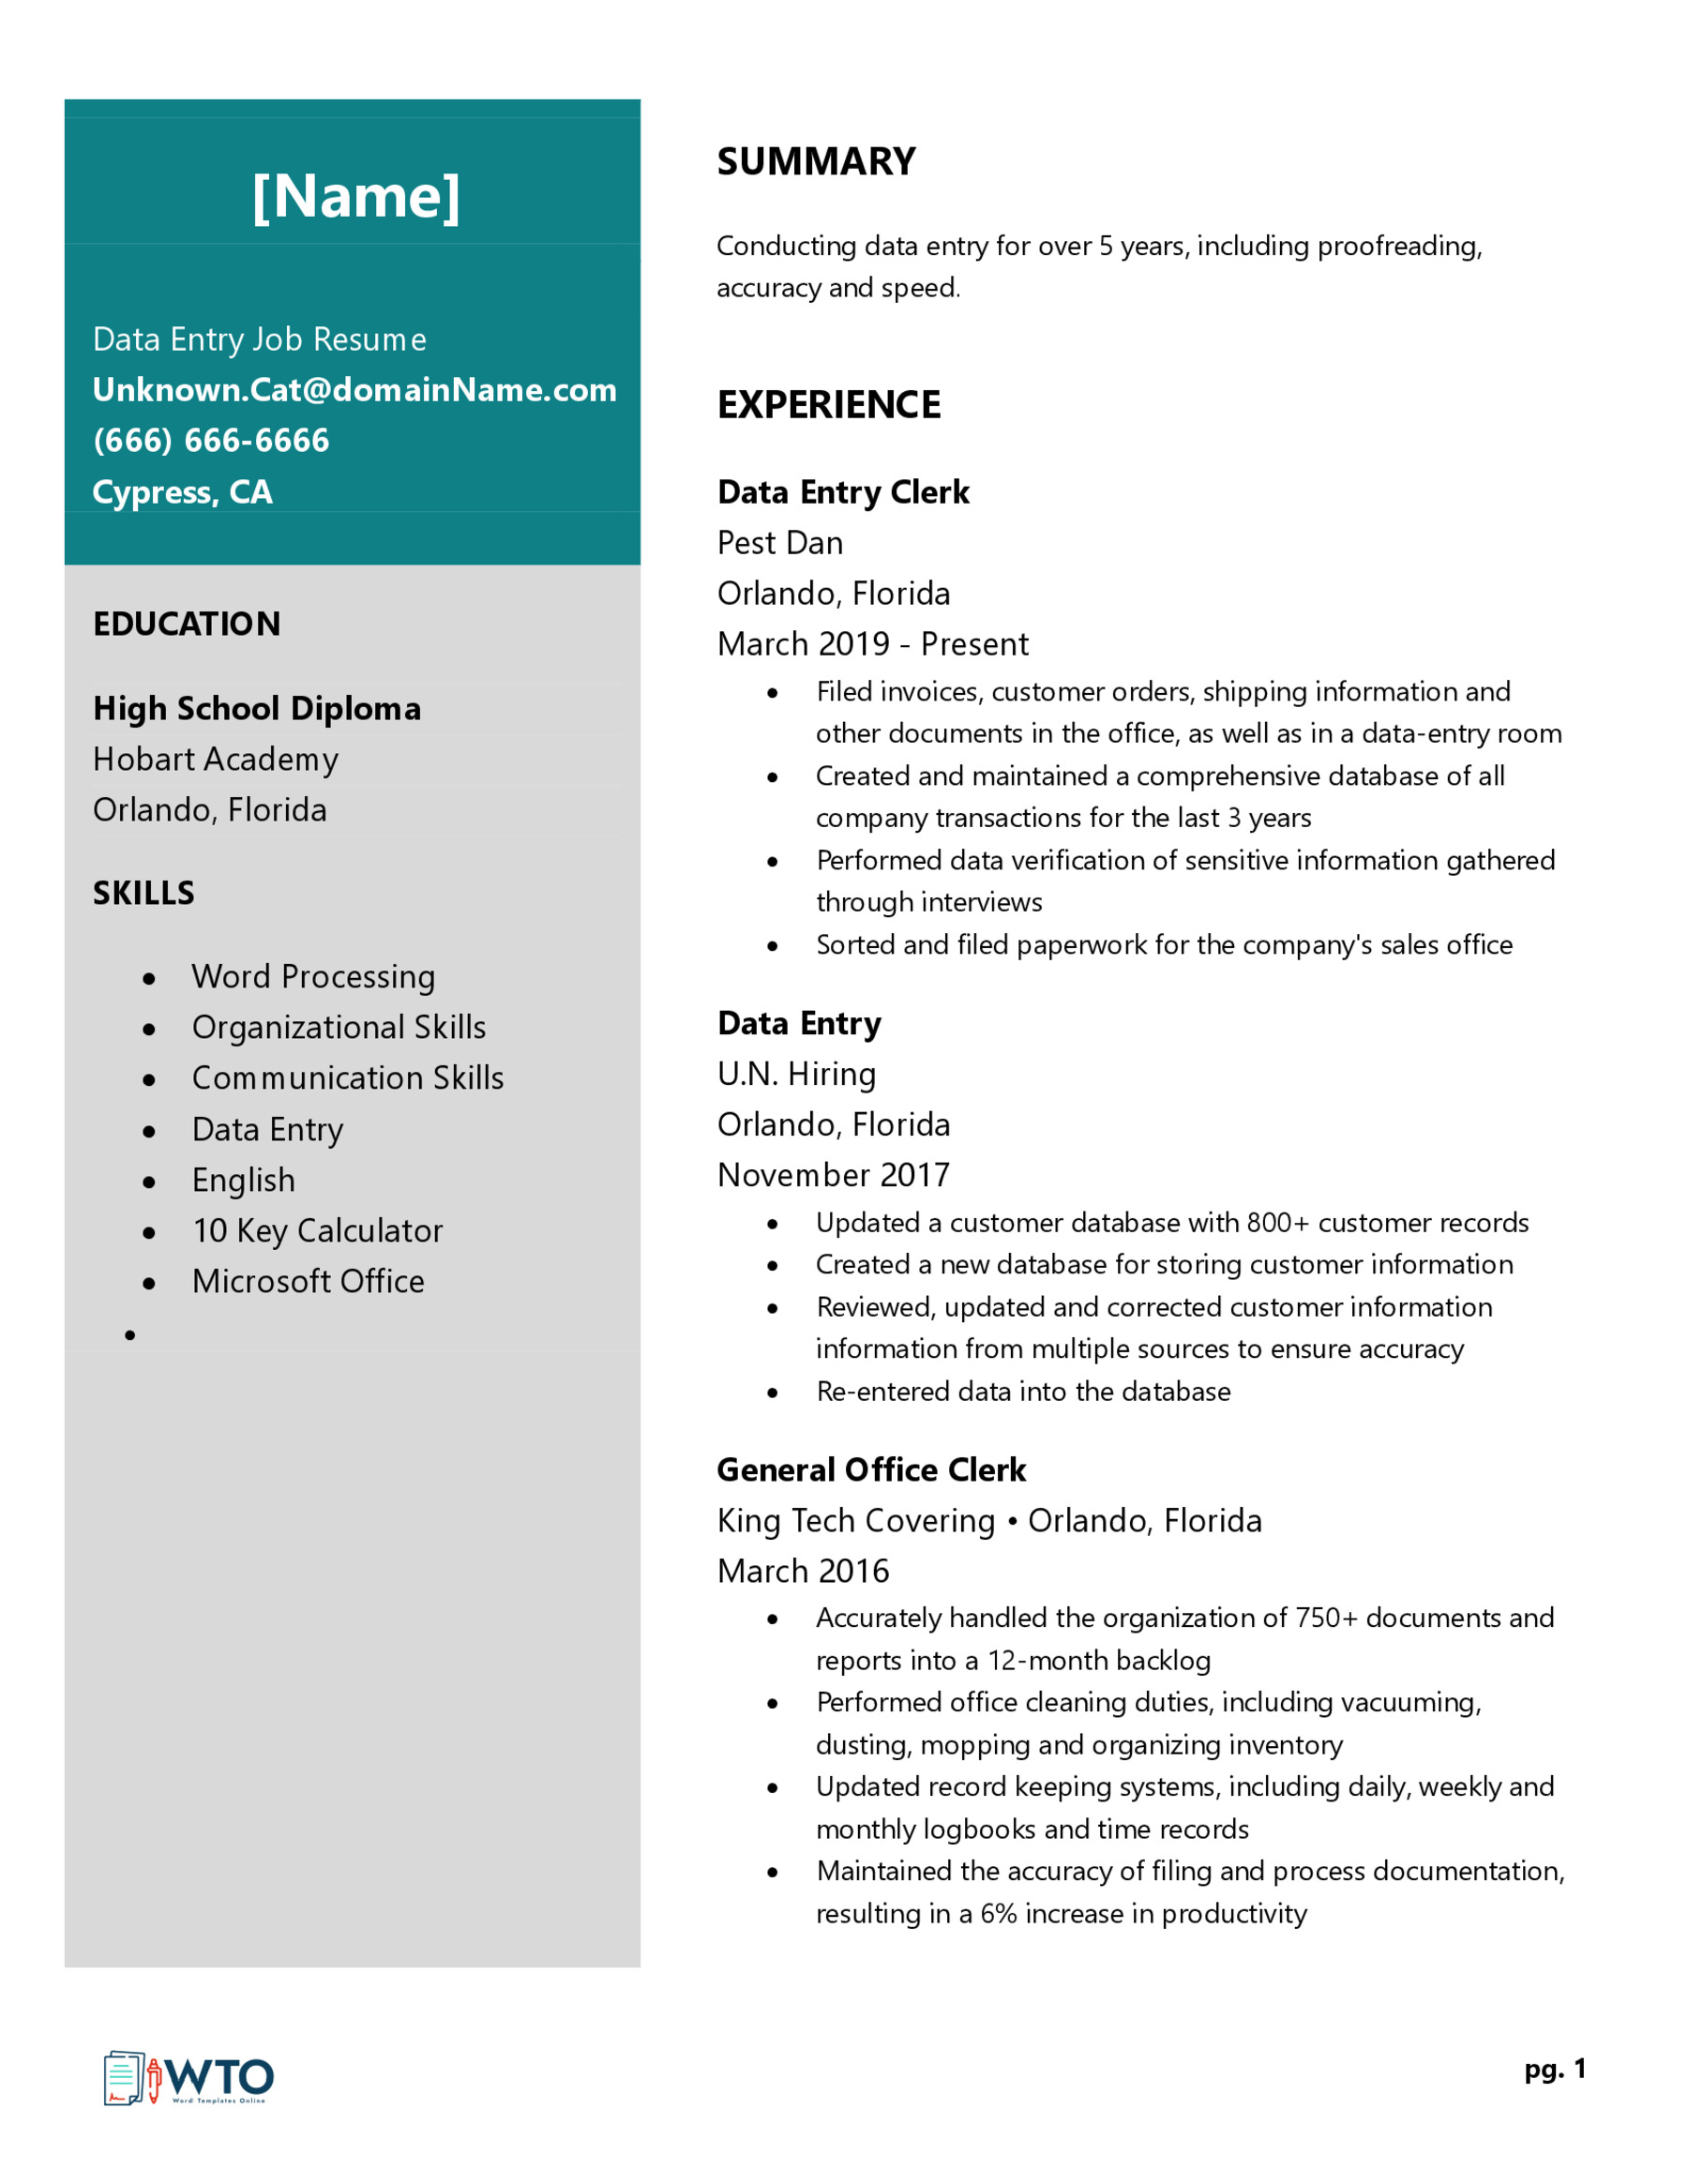 Data Entry Job Resume Template - Ready-to-Use Word Document